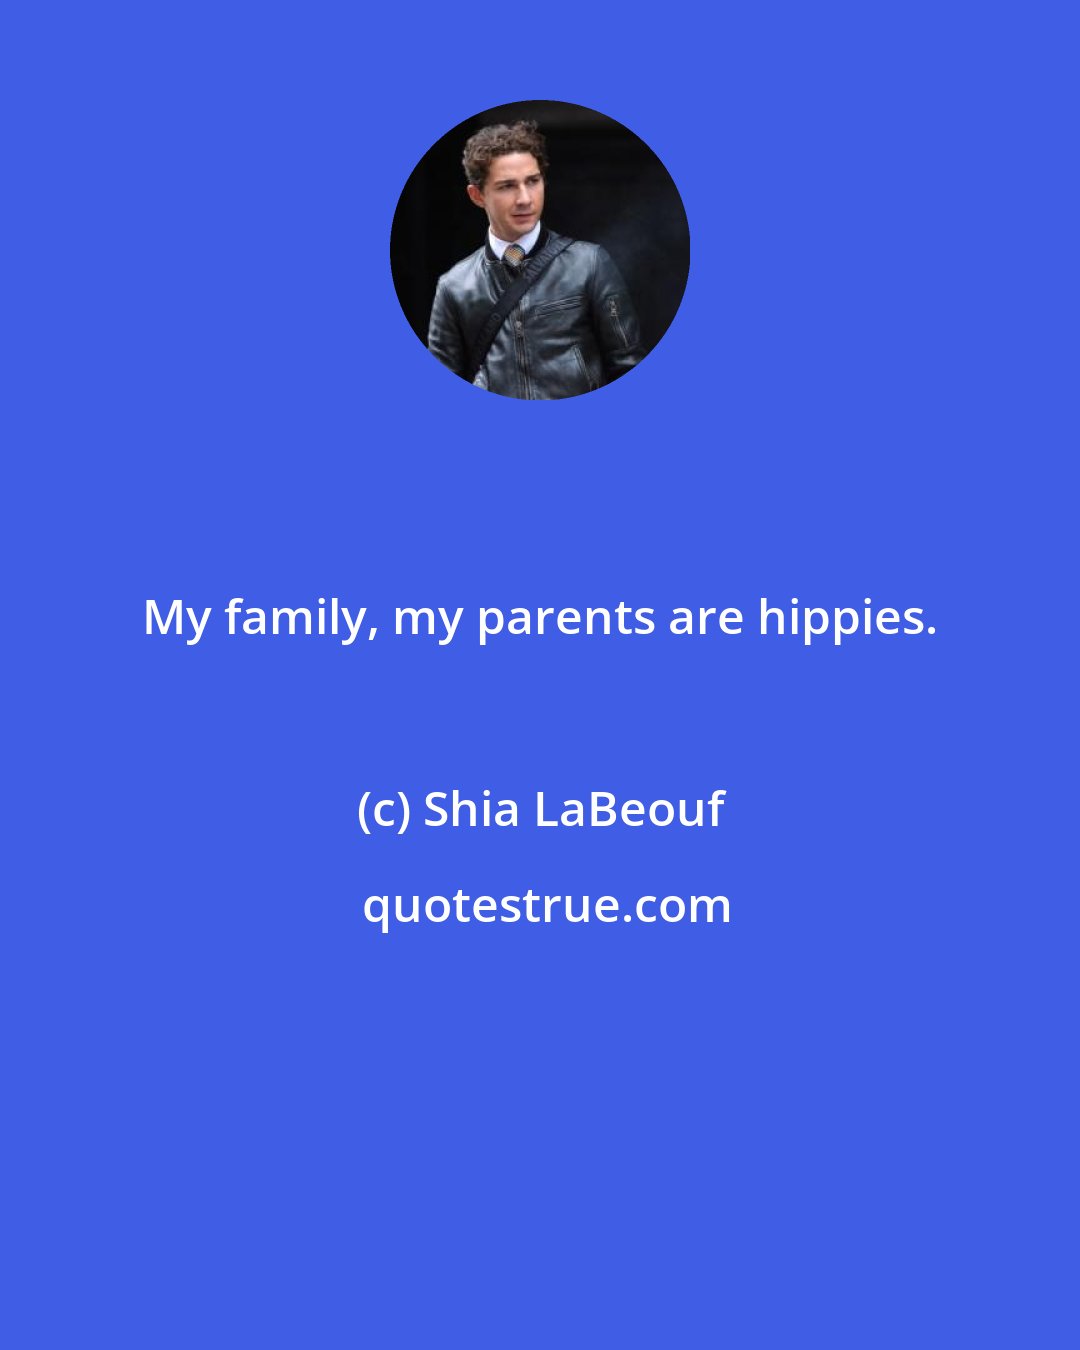 Shia LaBeouf: My family, my parents are hippies.